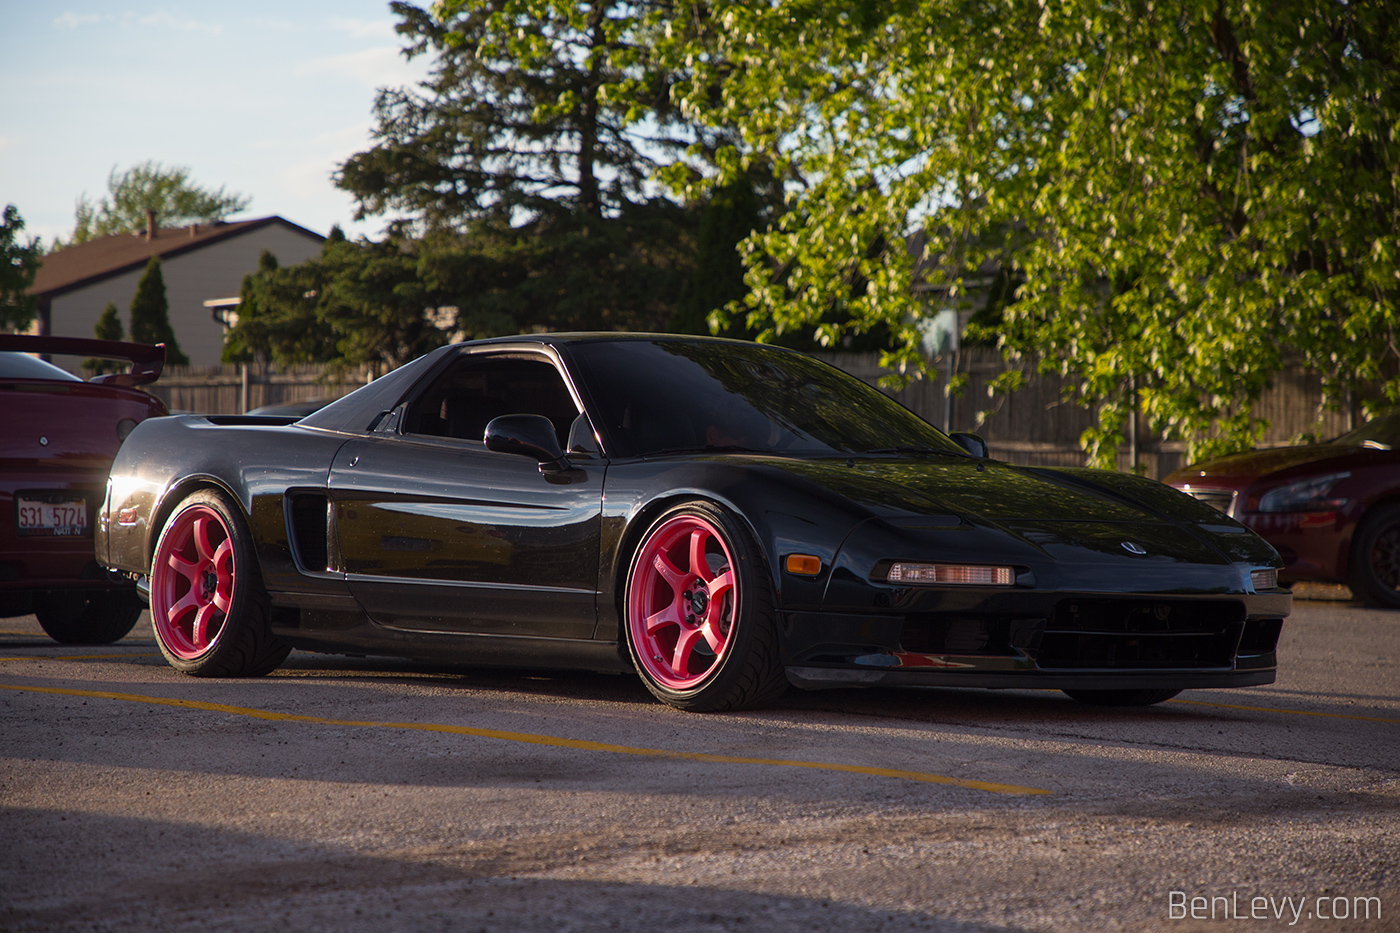 Black Acura NSX with Pink Wheels